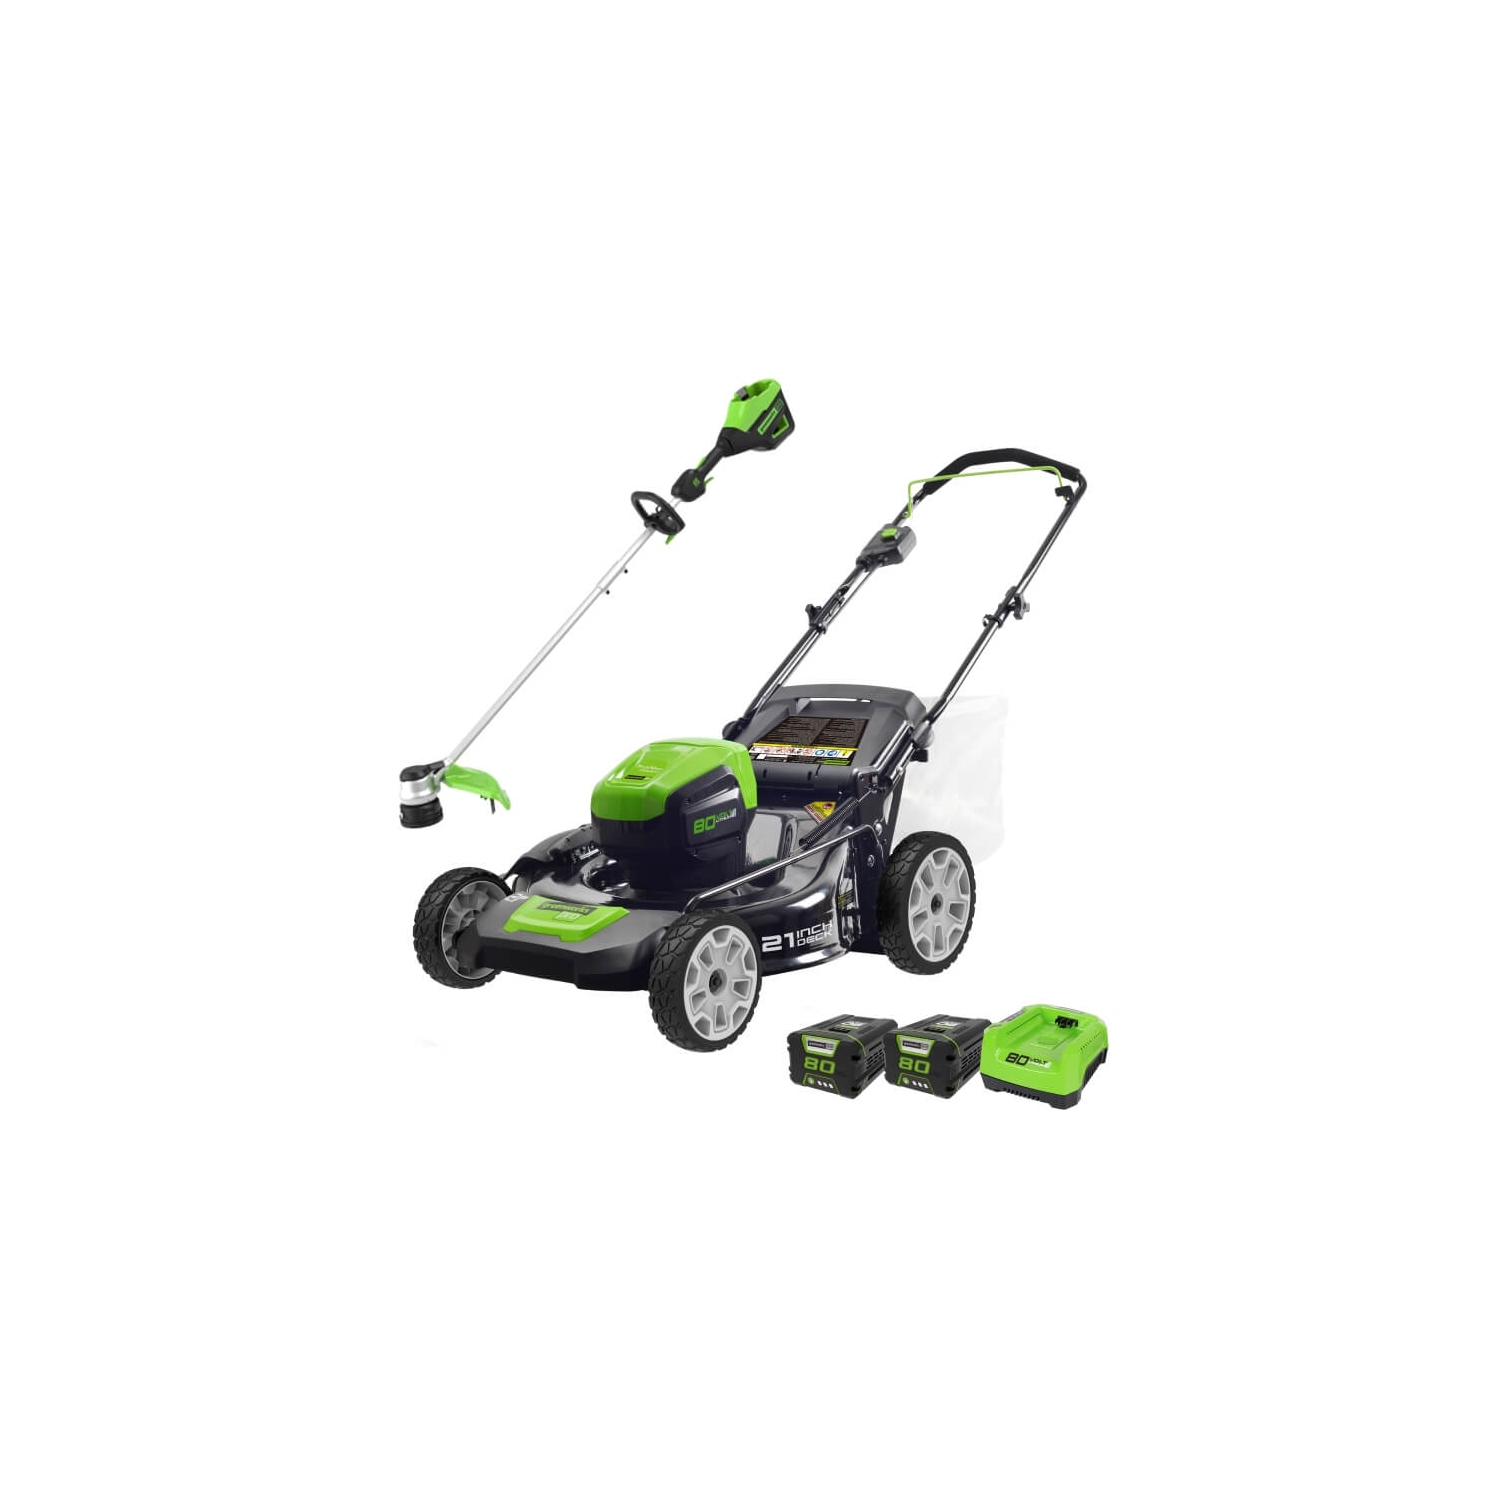 Greenworks PRO 80V 21-Inch Push Mower + 16-Inch String Trimmer, (2) 2.0 AH Batteries and Charger Included